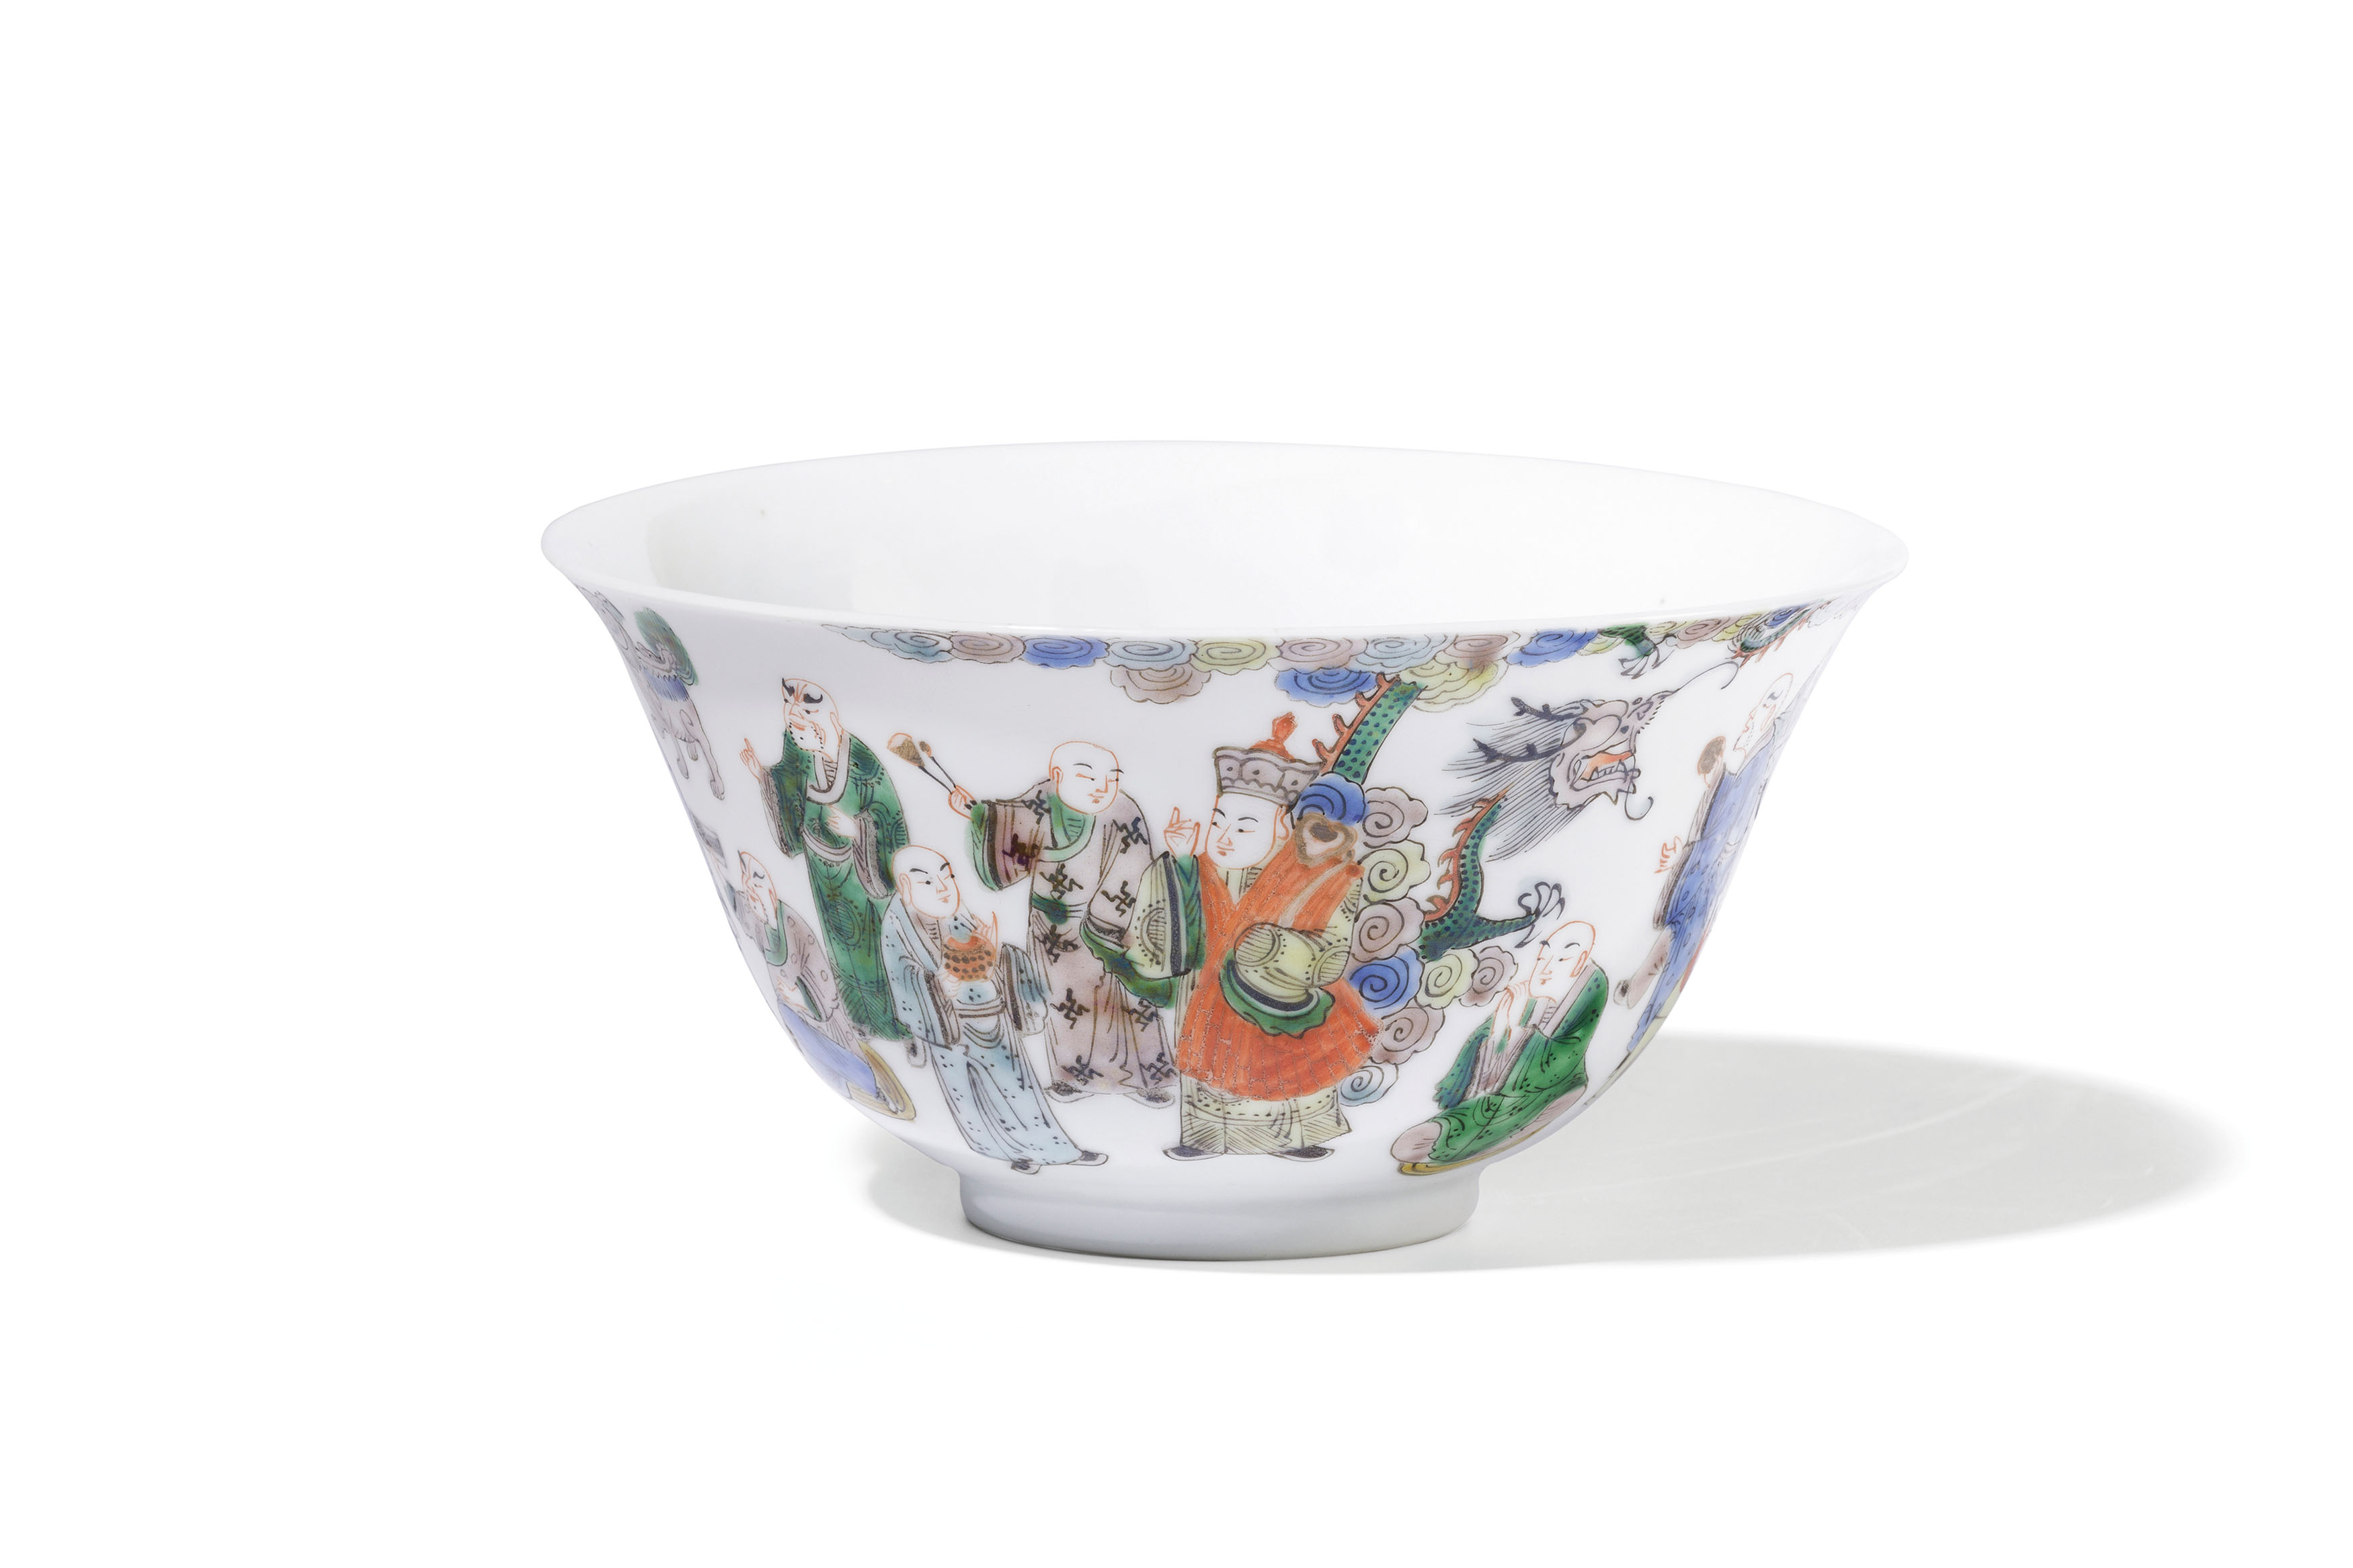 A FAMILLE VERTE PORCELAIN BOWL, CHINA, 19TH CENTURY, FOUR CHARACTER MARK AT THE BASE